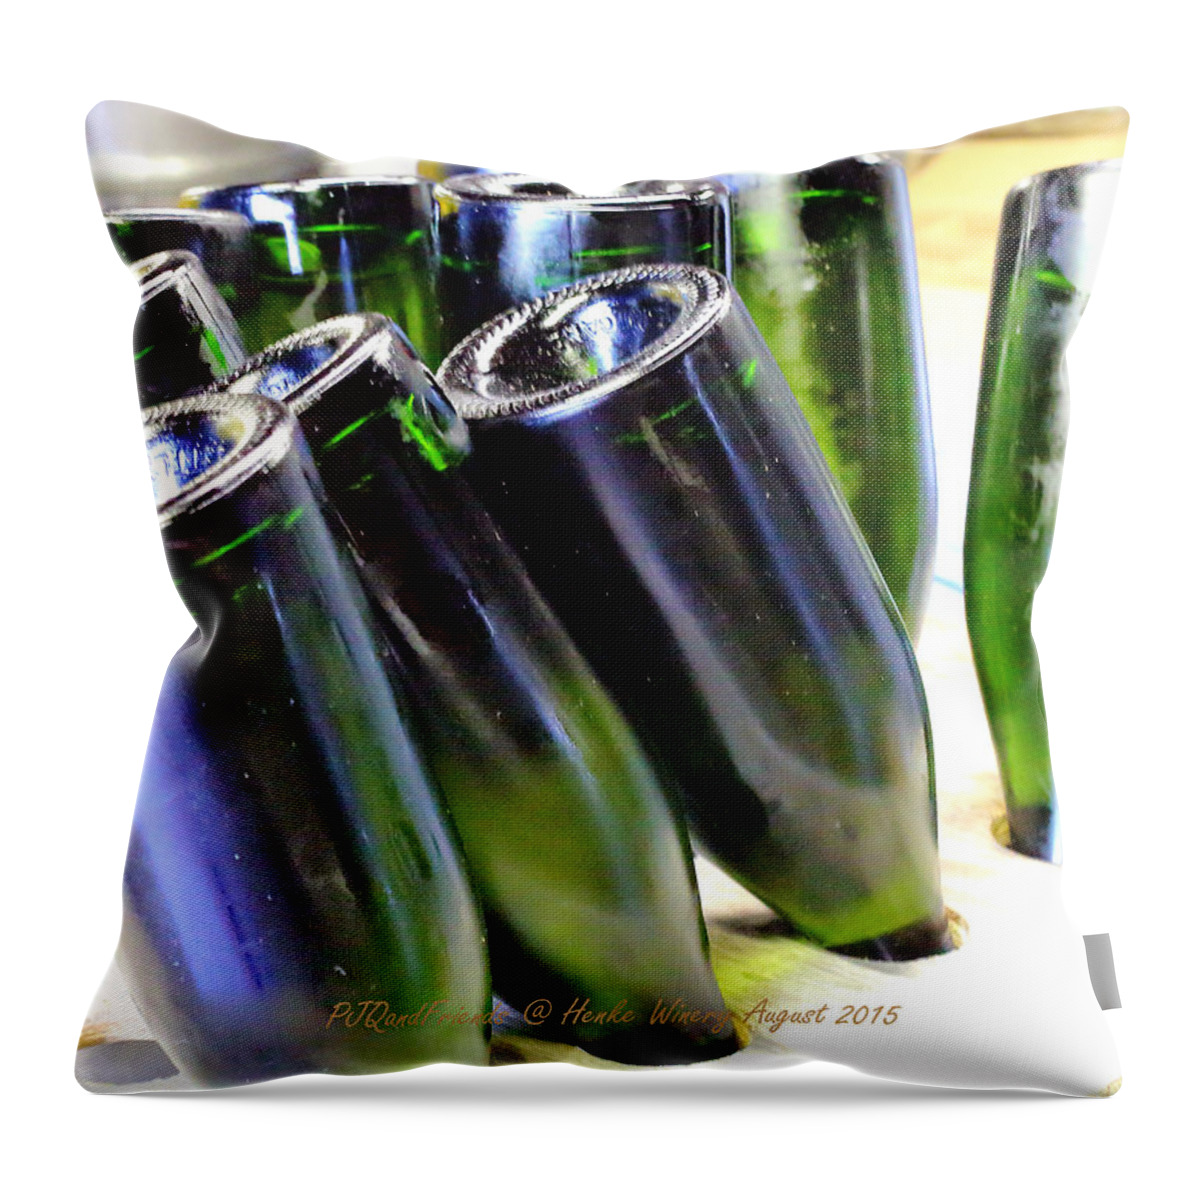 Henke Winery Sparkling Champagne Throw Pillow featuring the photograph Henke Winery Sparkling Champagne #1 by PJQandFriends Photography